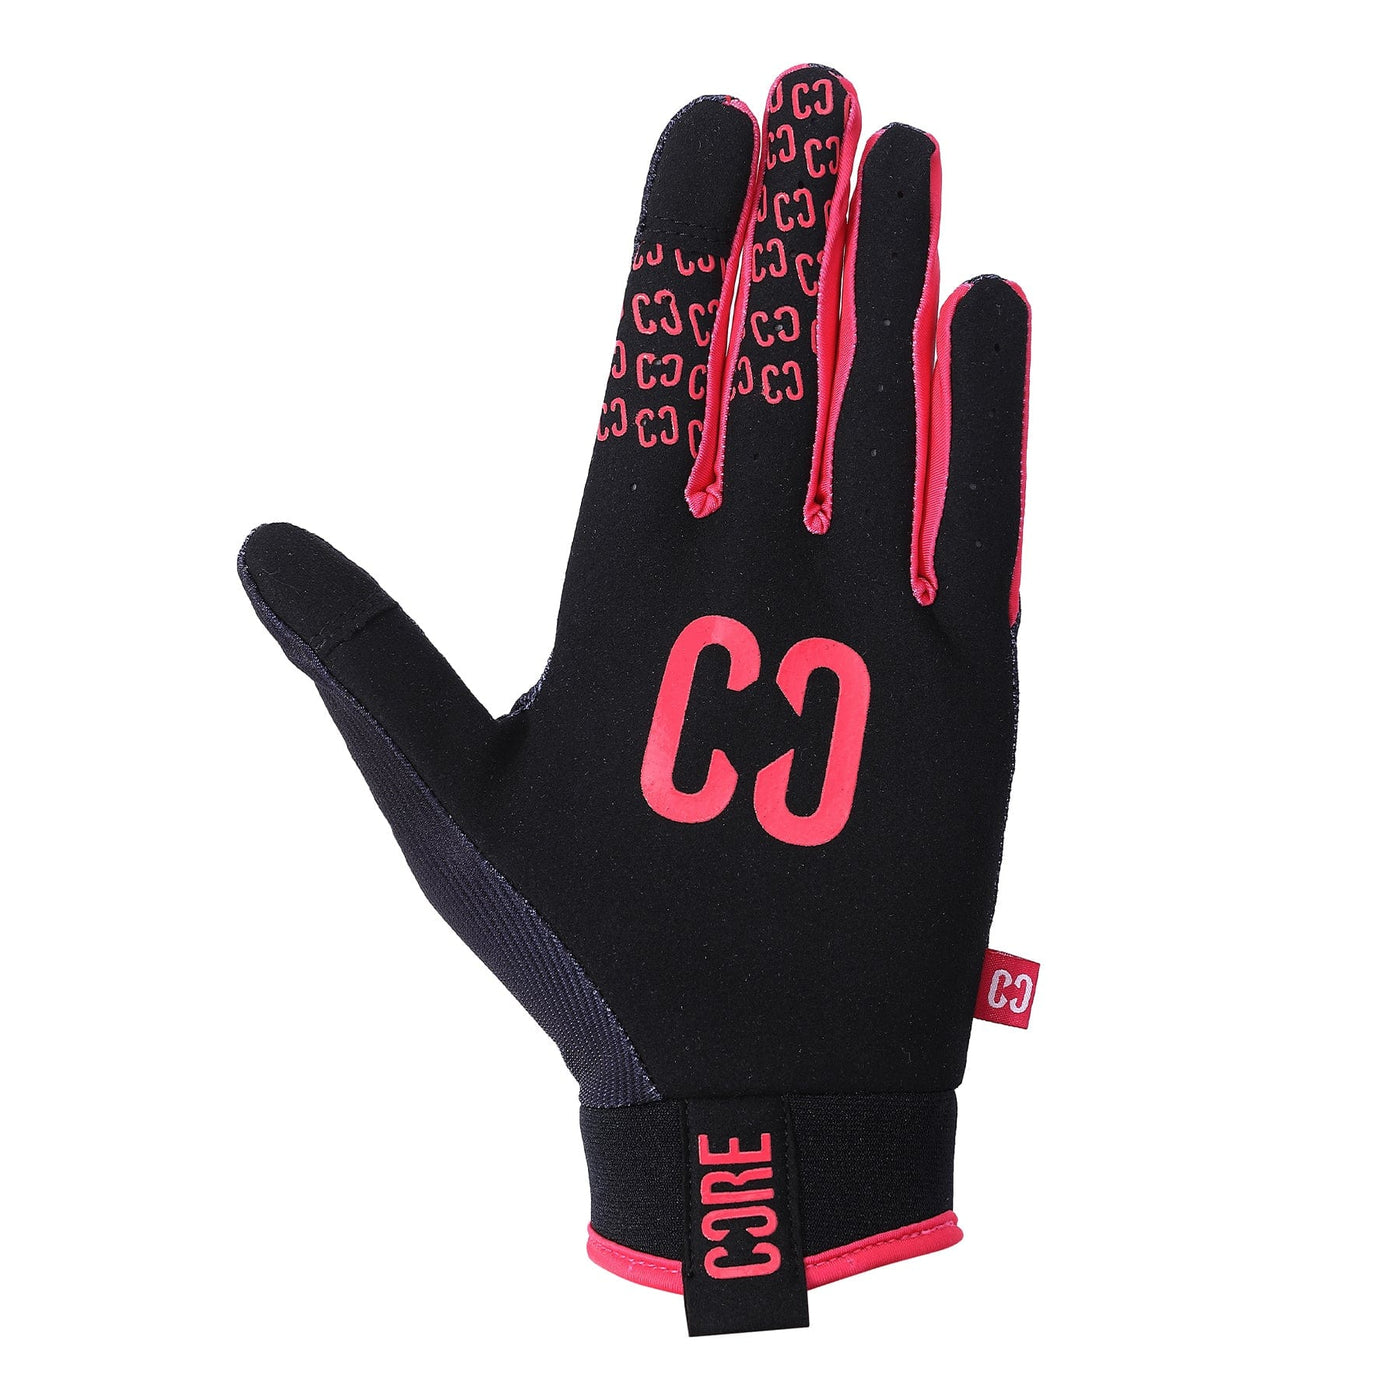 CORE Protection Aero Skateboard Gloves Accent Pink I Skateboarding Gloves Palm